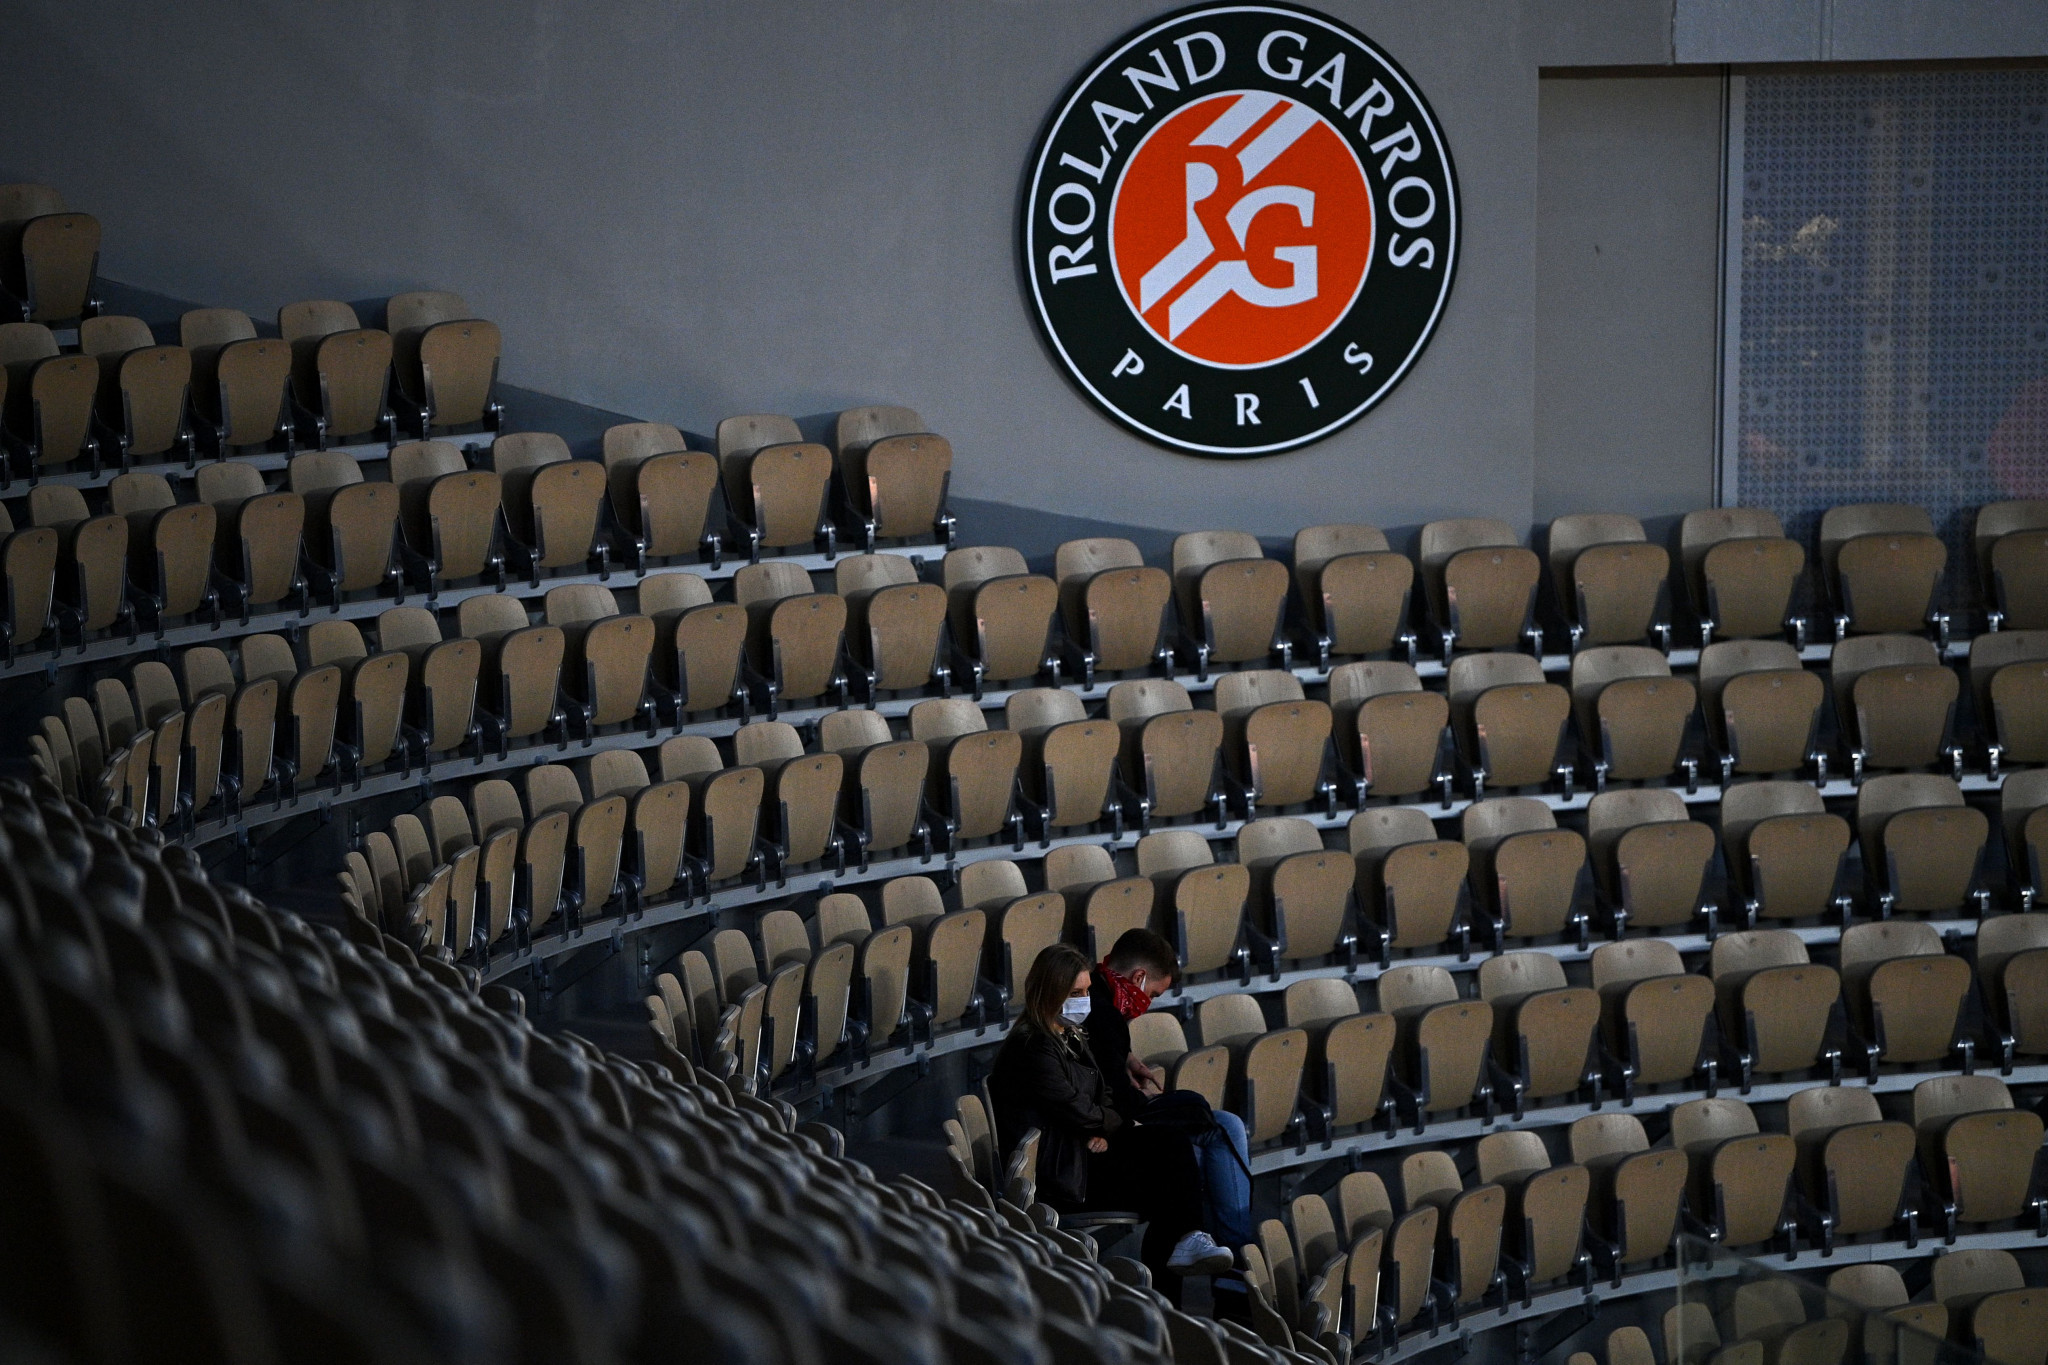 Limited fans were allowed at the 2020 French Open, after it was pushed back to September and October ©Getty Images